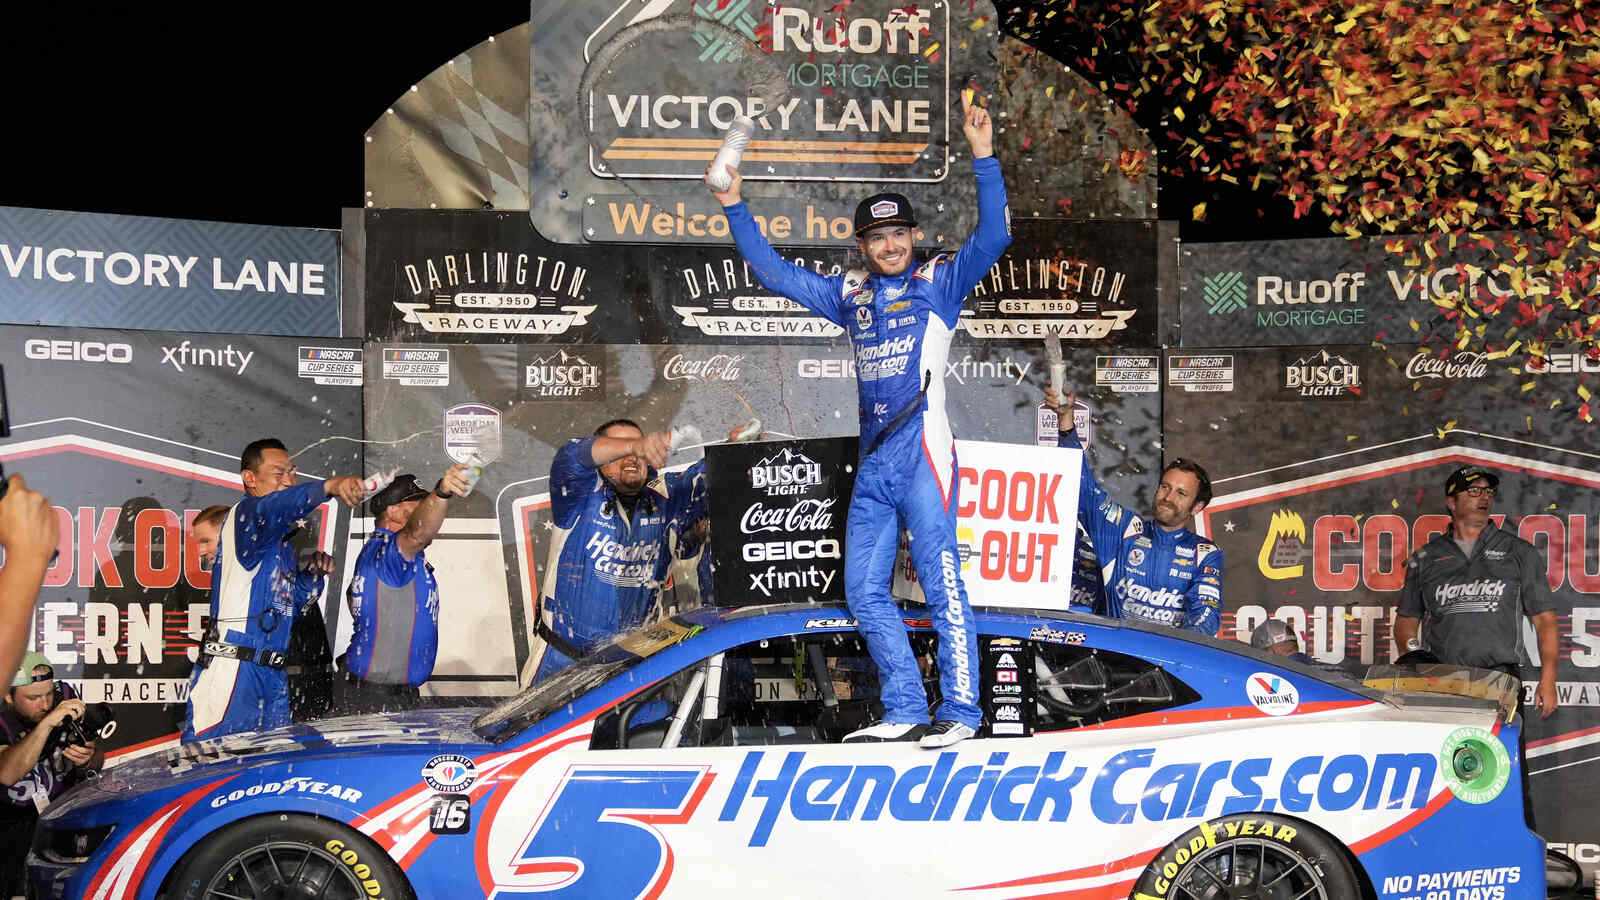 Kyle Larson wins Southern 500 Playoff race at Darlington and advances to next round